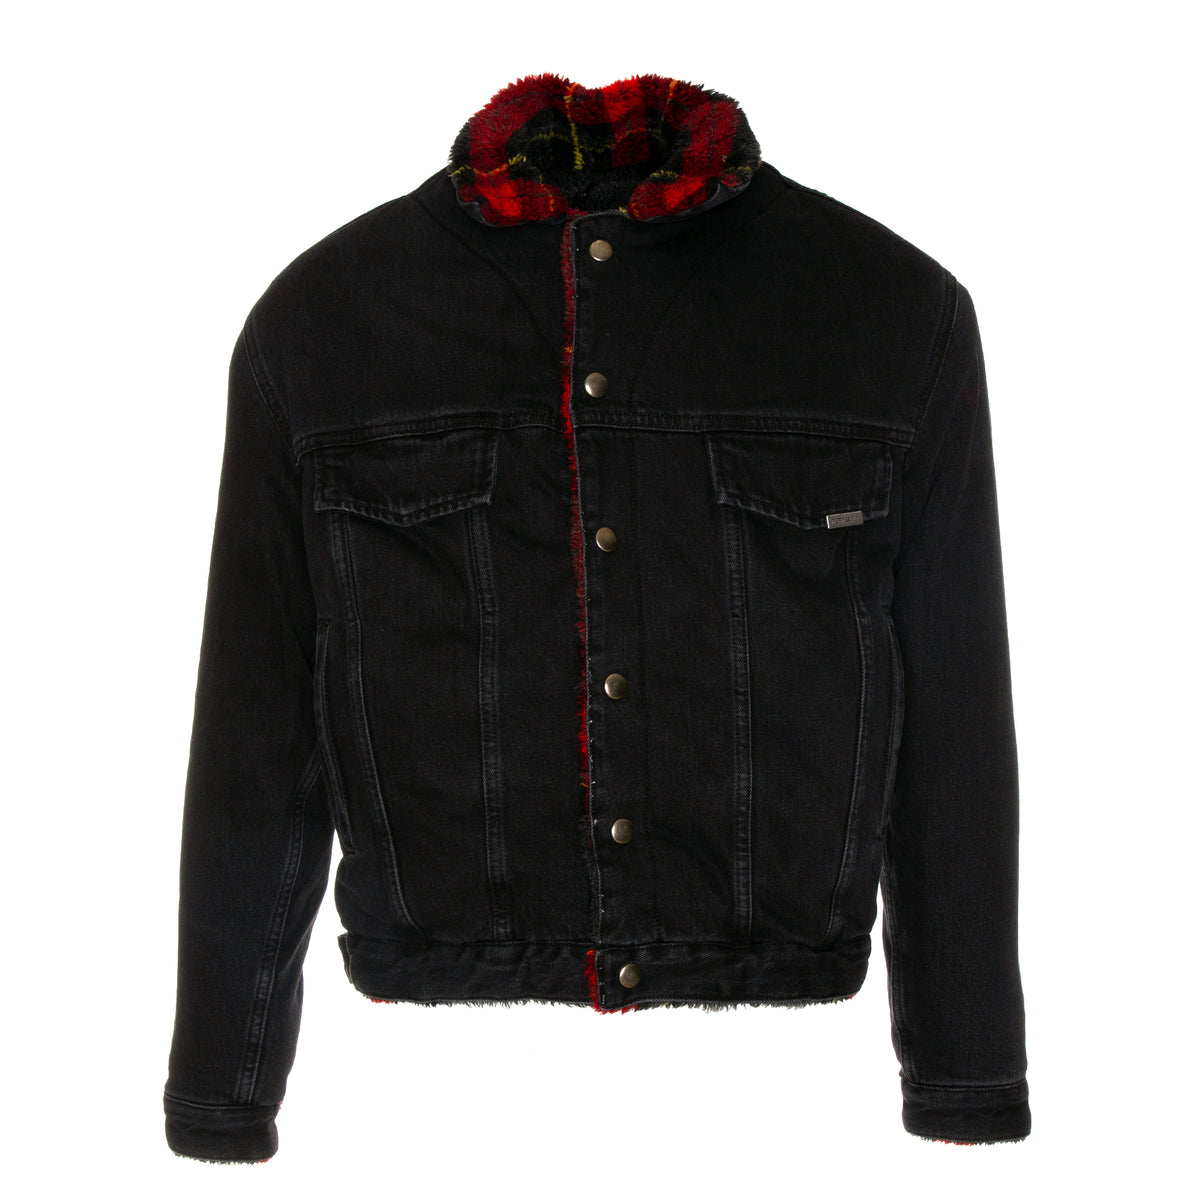 Represent Reversible Sherpa Denim Jacket in Black with Plaid Lining